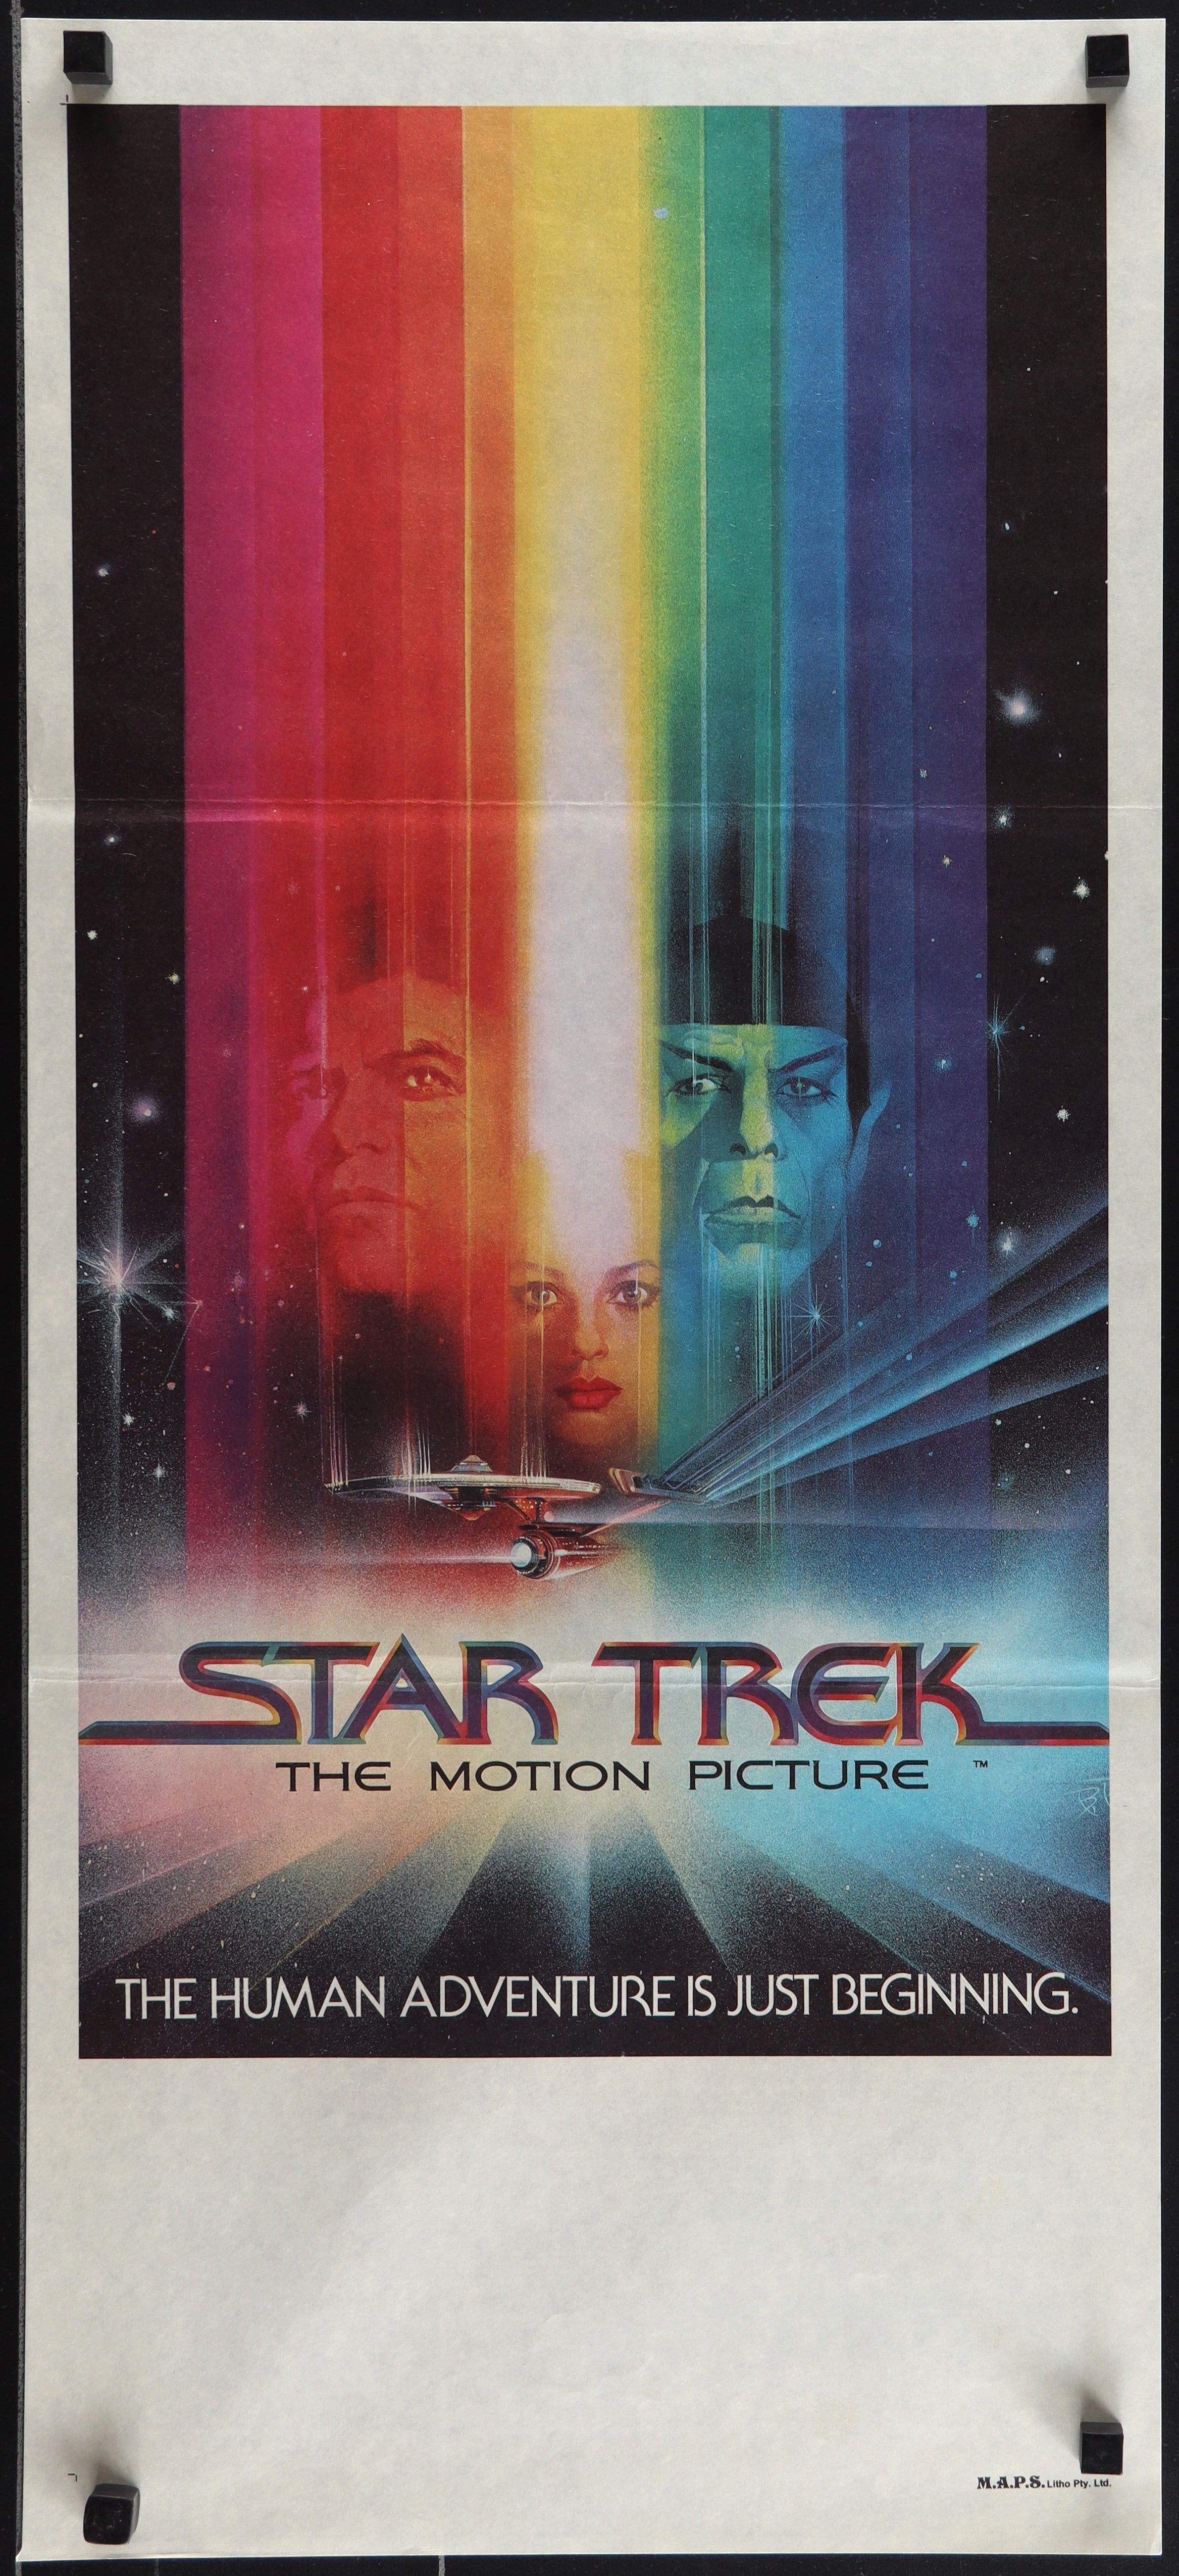 STAR TREK: THE MOTION PICTURE (1979)